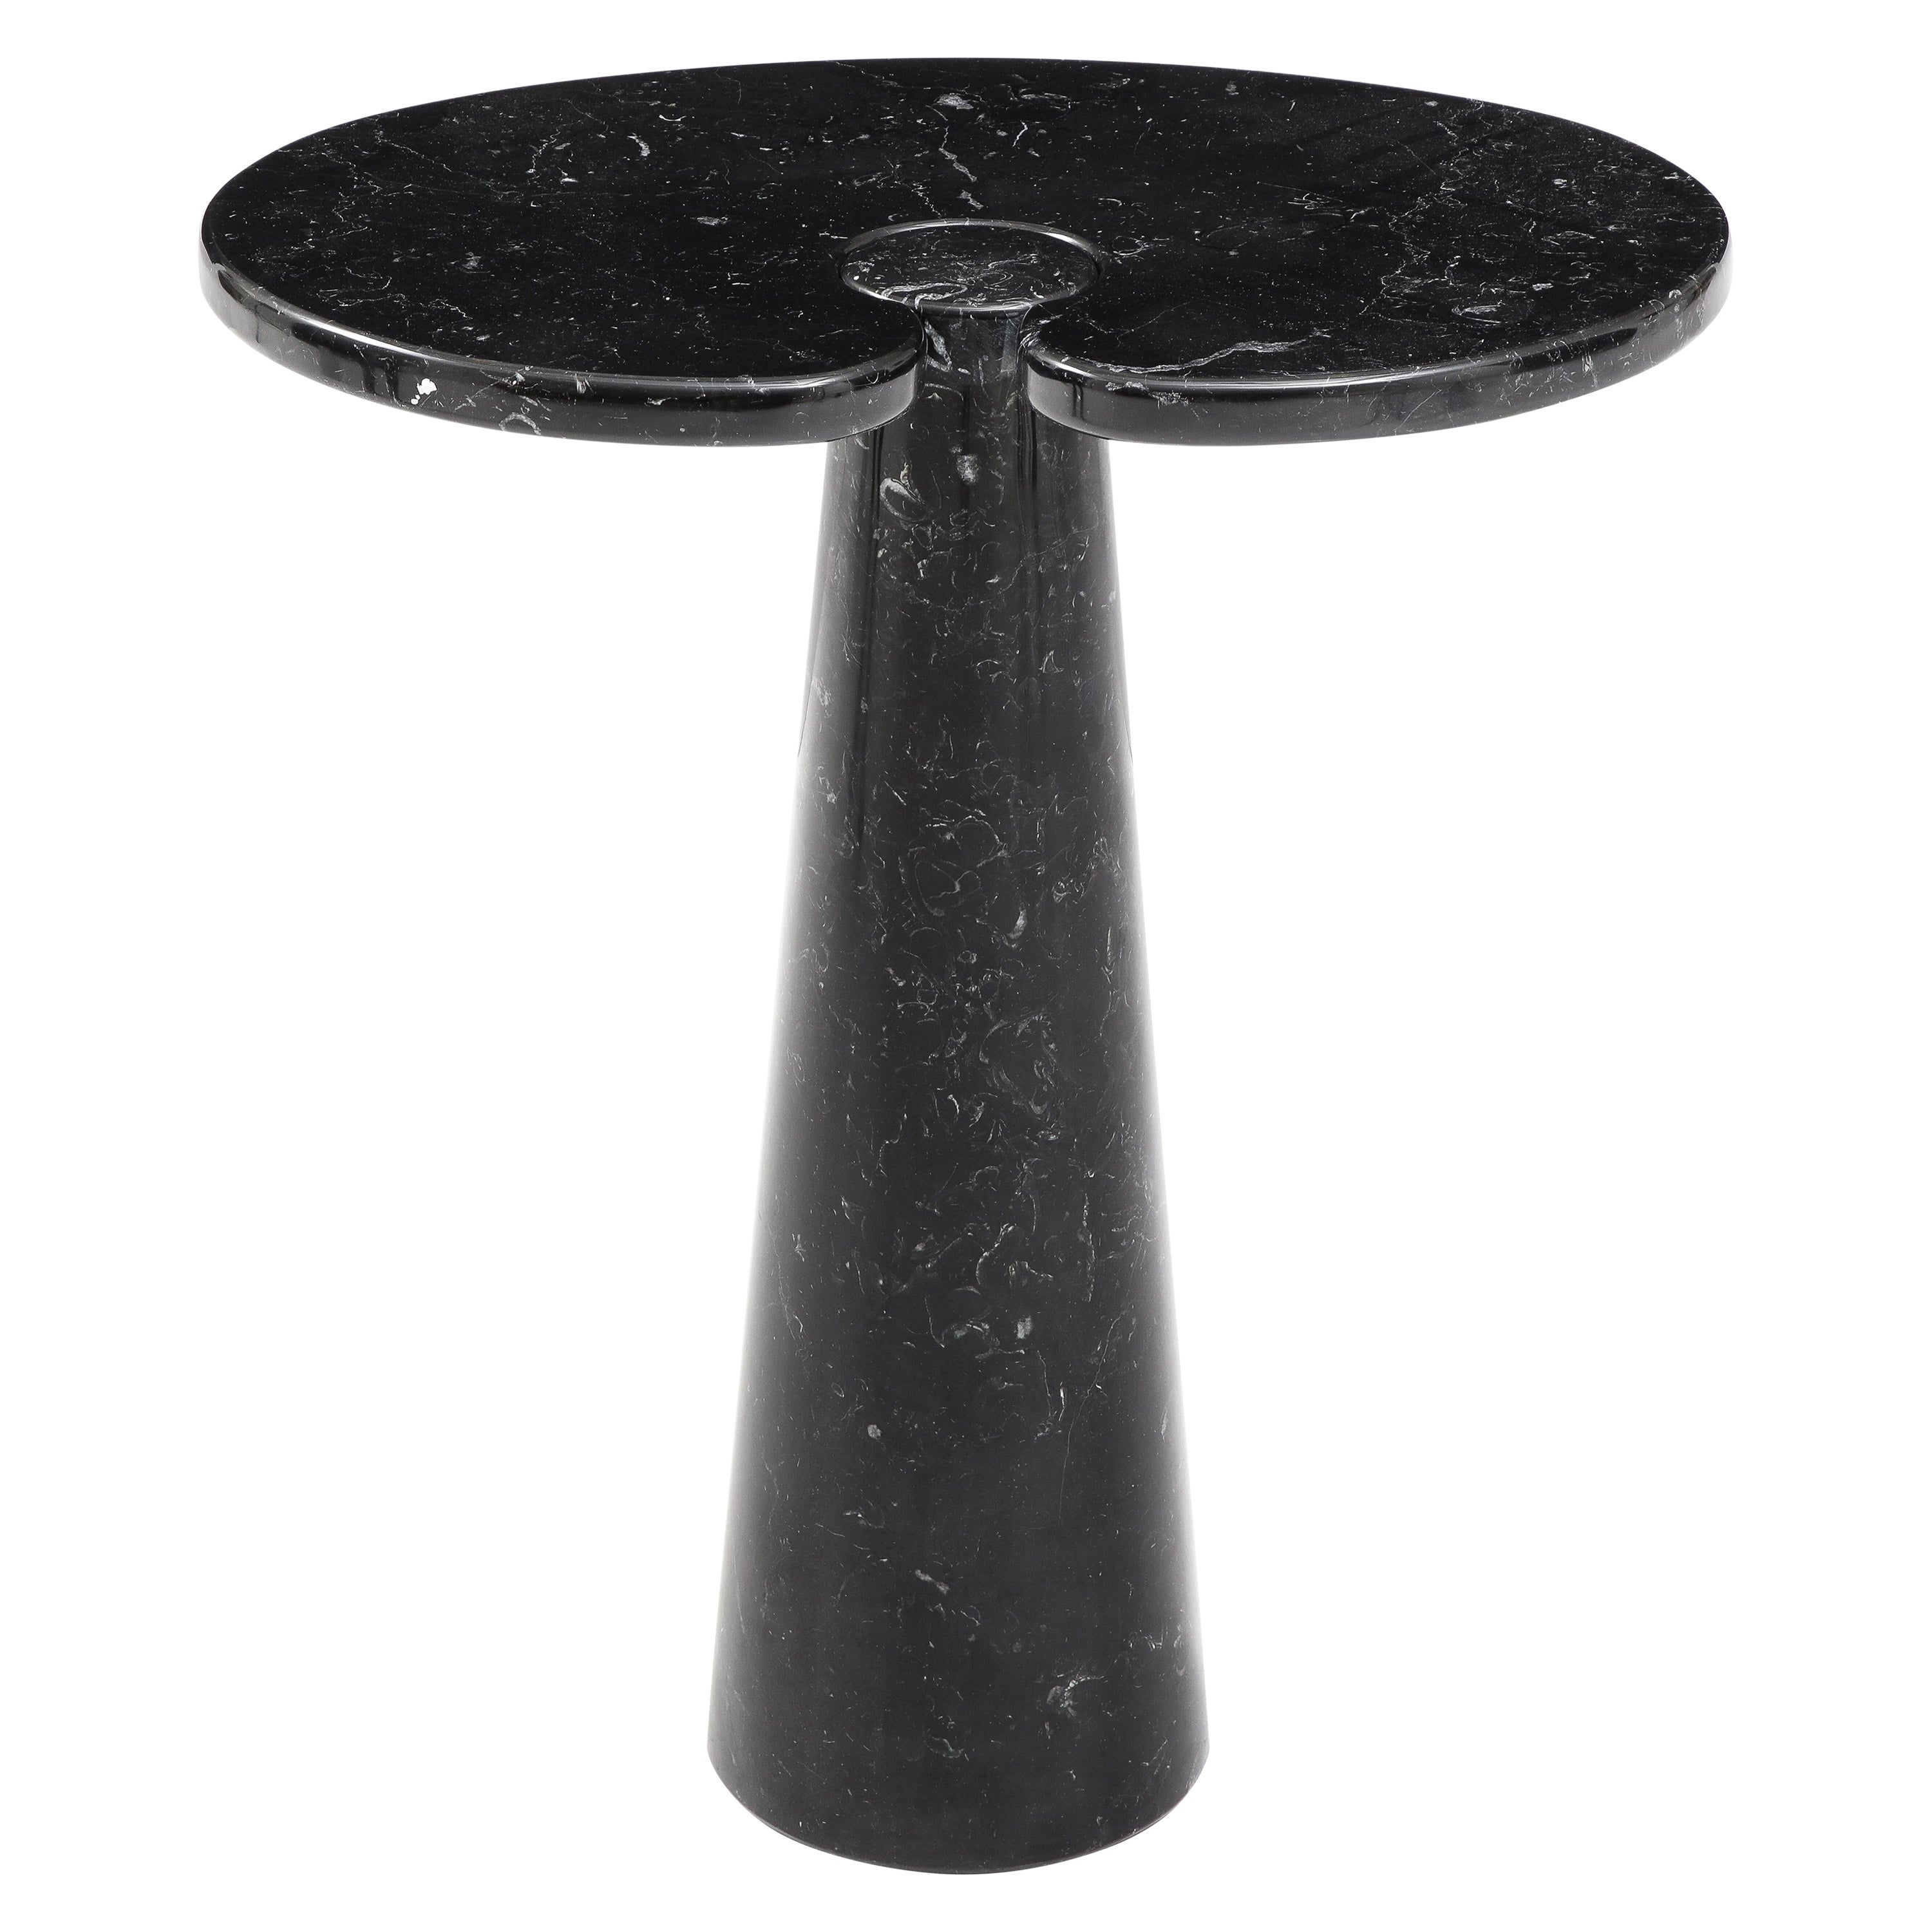 Angelo Mangiarotti Nero Marquina Marble Tall Side Table from Eros Series, 1971 For Sale